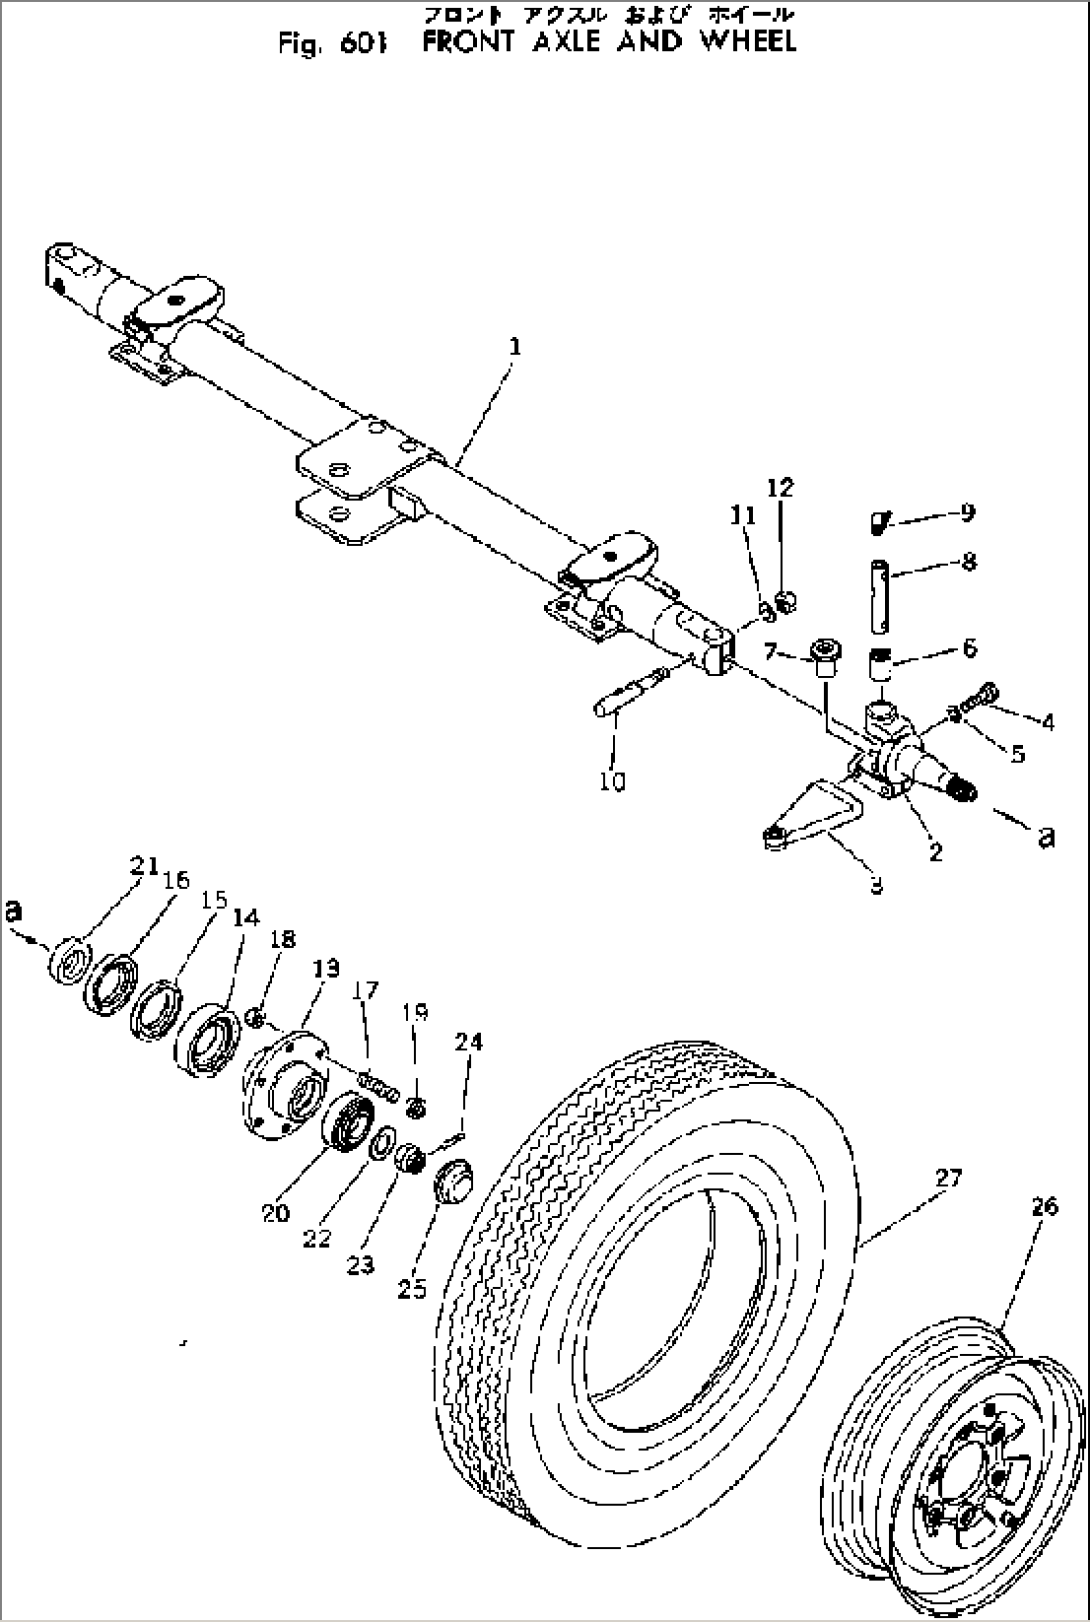 FRONT AXLE AND WHEELS